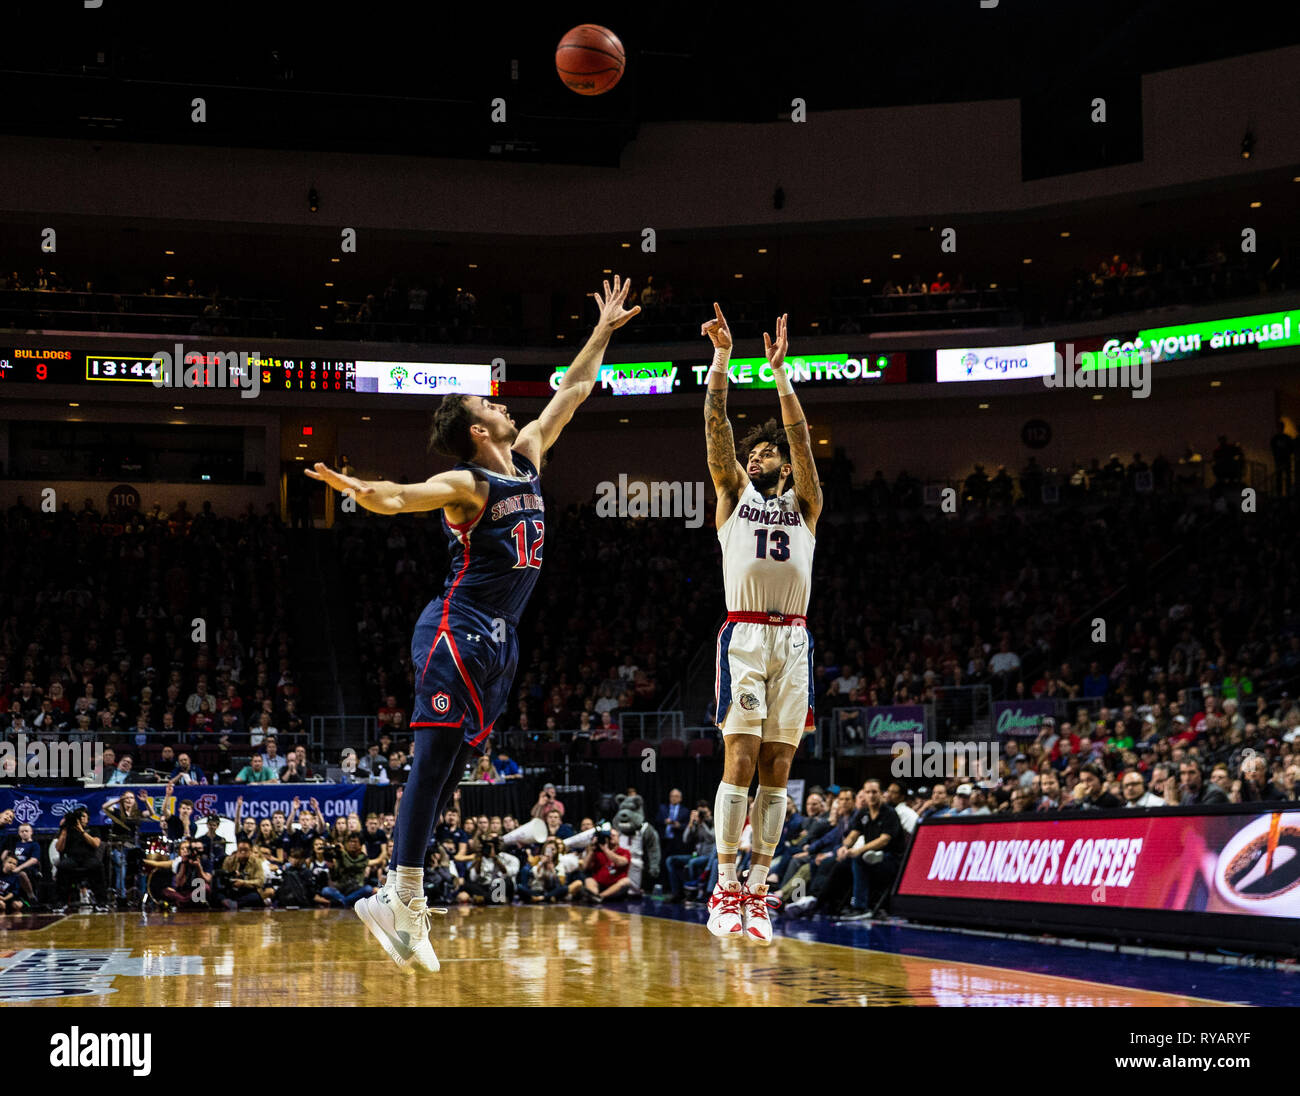 Mar 12 2019 Las Vegas, NV, U.S.A.Gonzaga guard Josh Perkins (13) takes a shot during the NCAA West Coast Conference Men's Basketball Tournament championship between the Gonzaga Bulldogs and the Saint Mary's Gaels 47-60 lost at Orleans Arena Las Vegas, NV. Thurman James/CSM Stock Photo